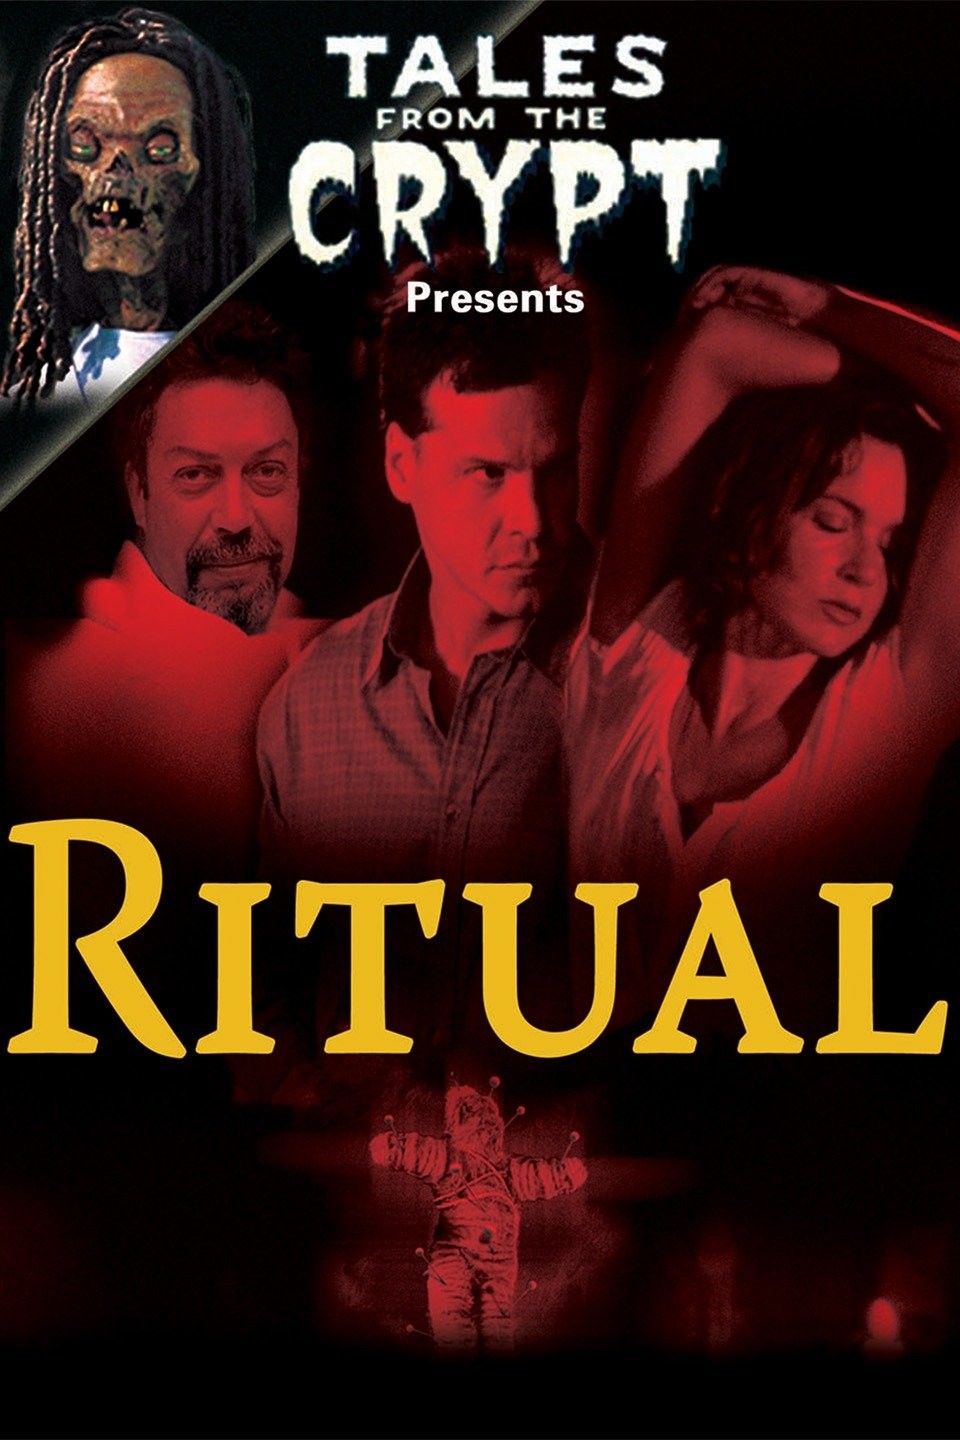 Tales from the crypt presents ritual